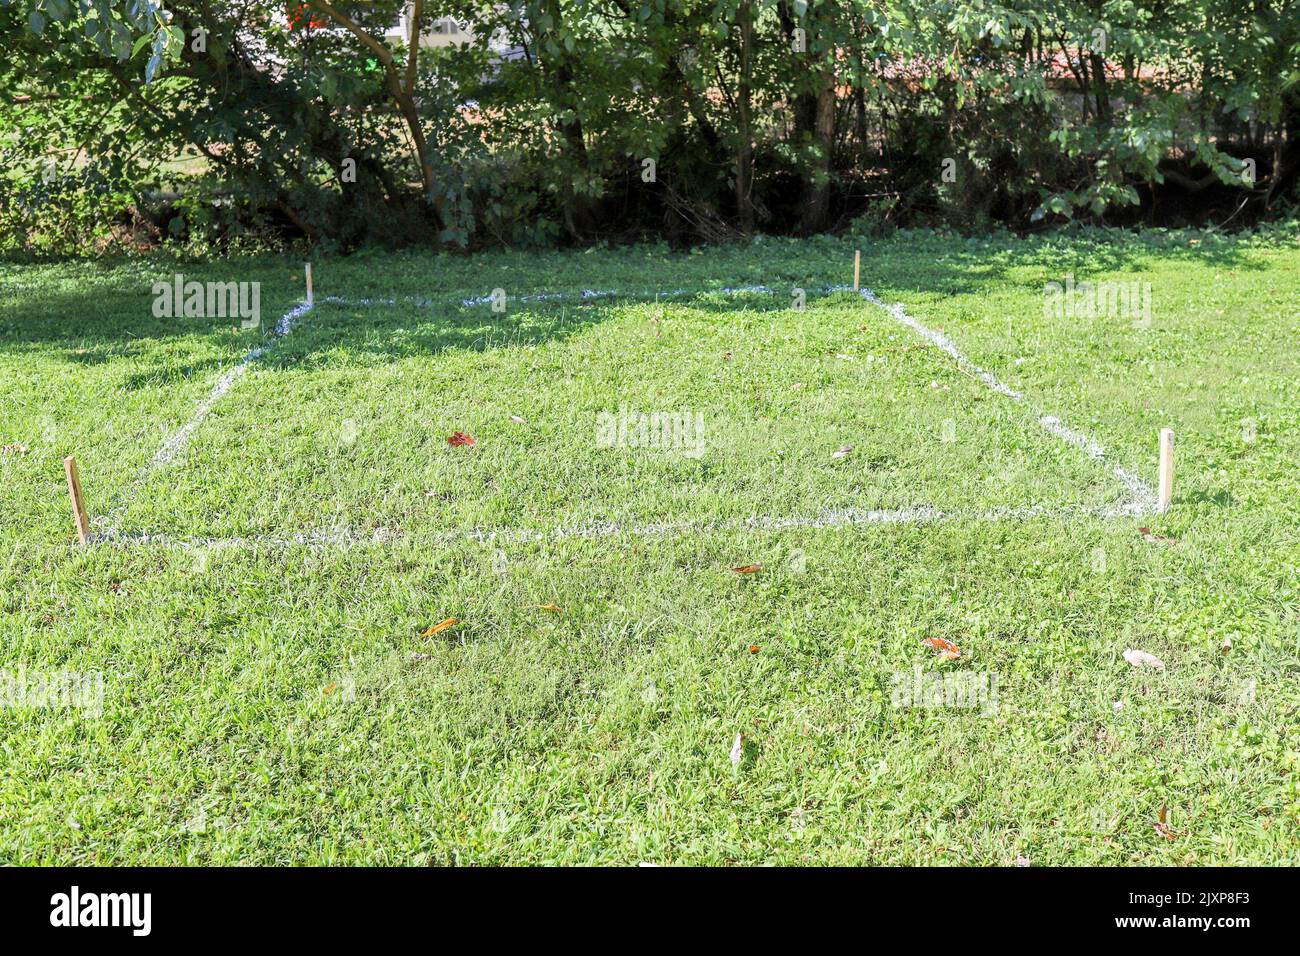 Lawn paint sprayed on grass for measurements for a shed Stock Photo